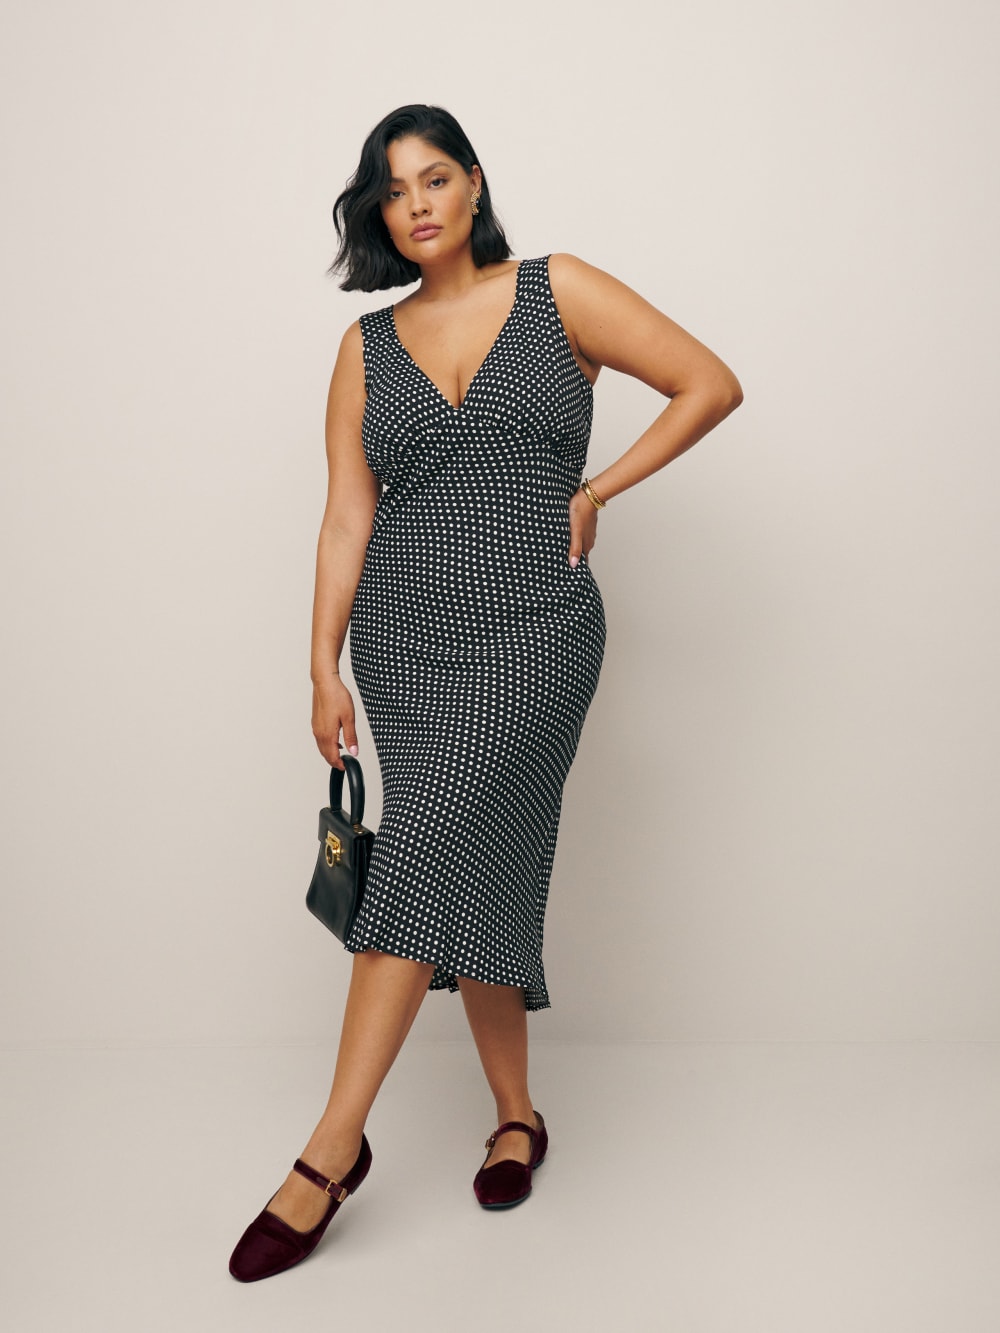 2024 wedding guest outfits - Reformation Beauden polka dot midi dress in navy and white has Adjustable wide straps, v-neck neckline and a bias cut. 